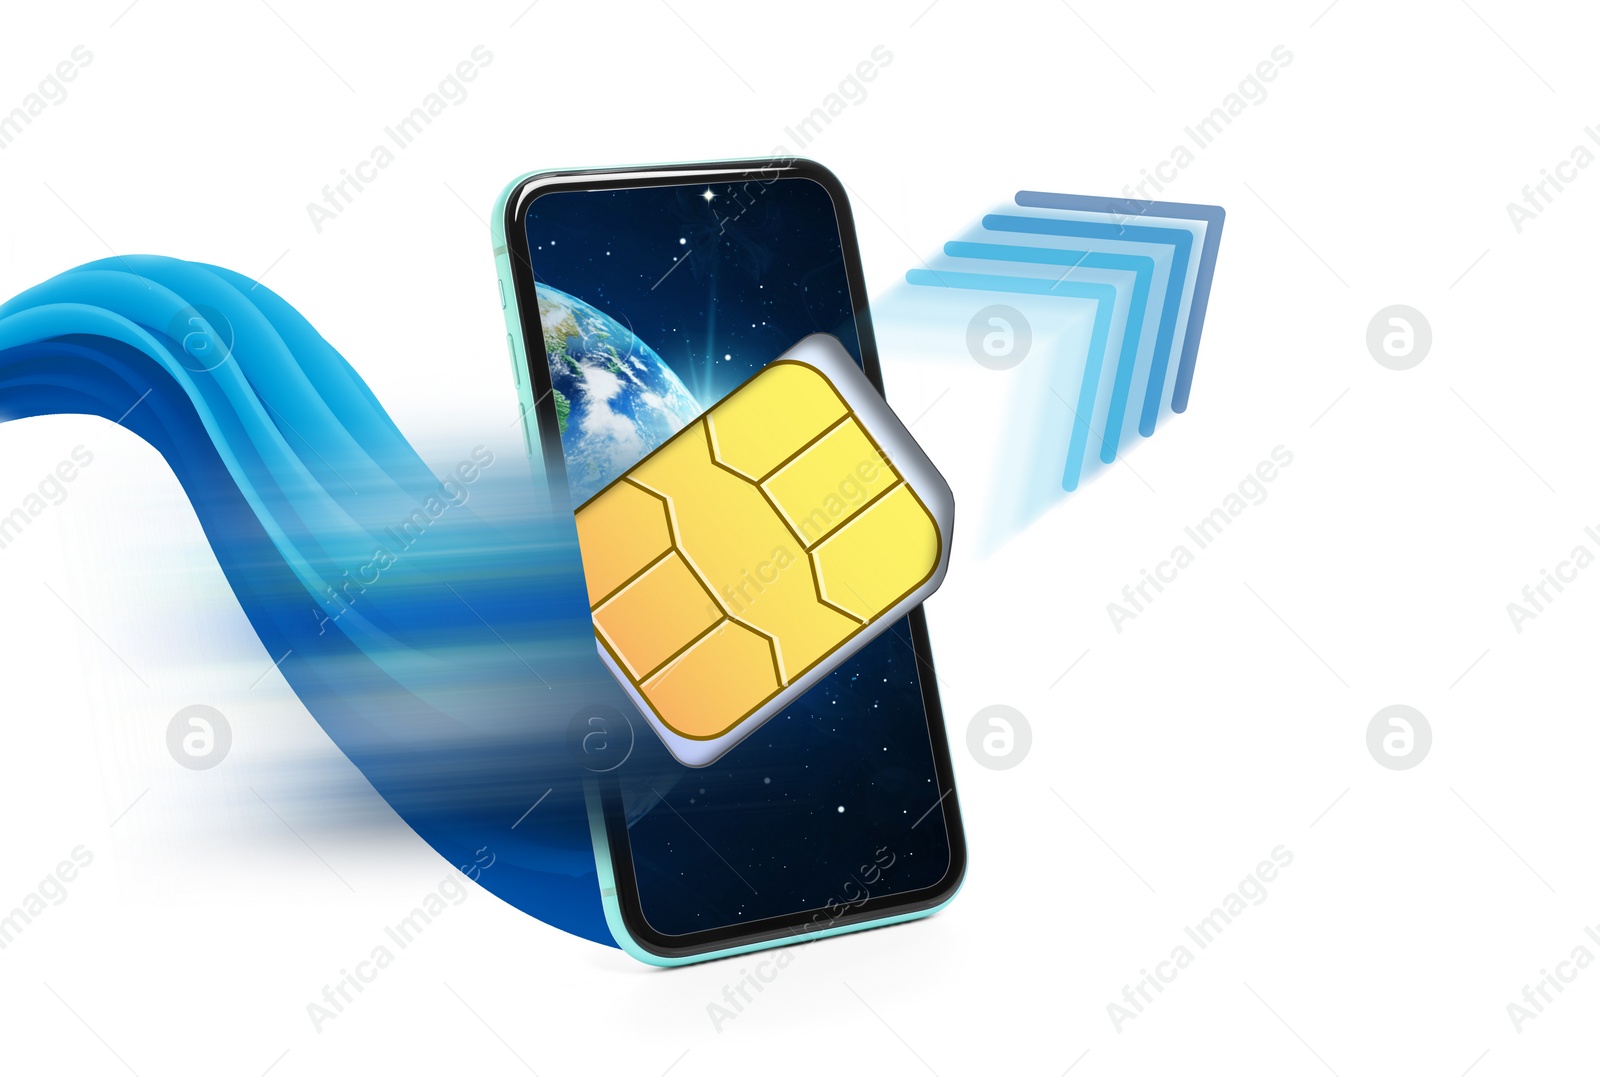 Image of Fast internet connection. SIM card flying out of smartphone on light blue background